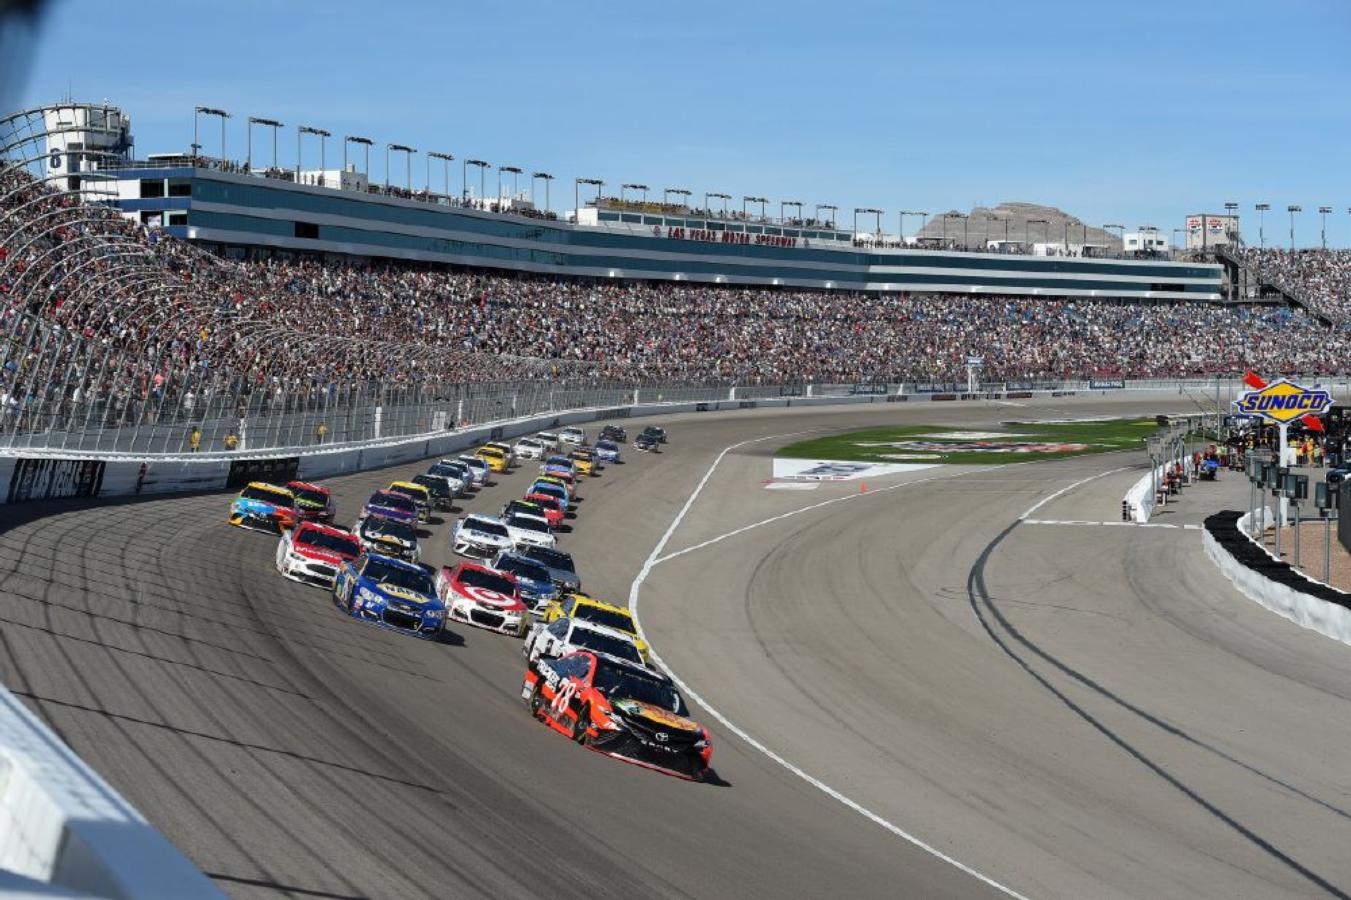 Start Times Announced For 2018 Monster Energy Nascar Cup Series Events News Media Las